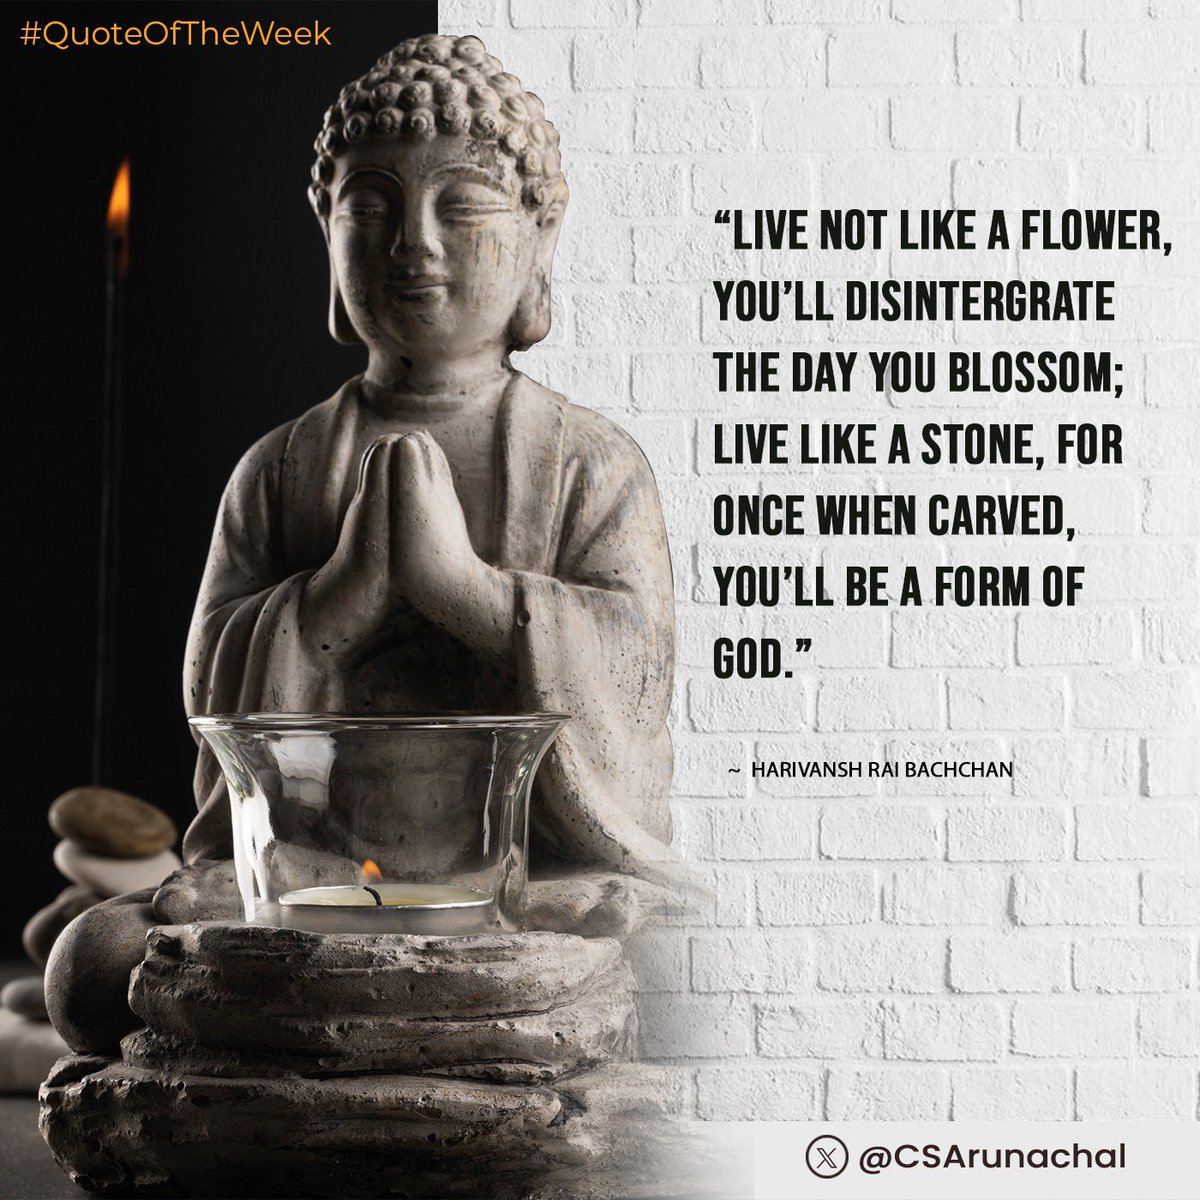 #QuoteOfTheWeek

Live not like a flower, you’ll disintegrate the day you blossom; live like a stone, for once when carved, you’ll be a form of God.
~
Harivansh Rai Bachchan